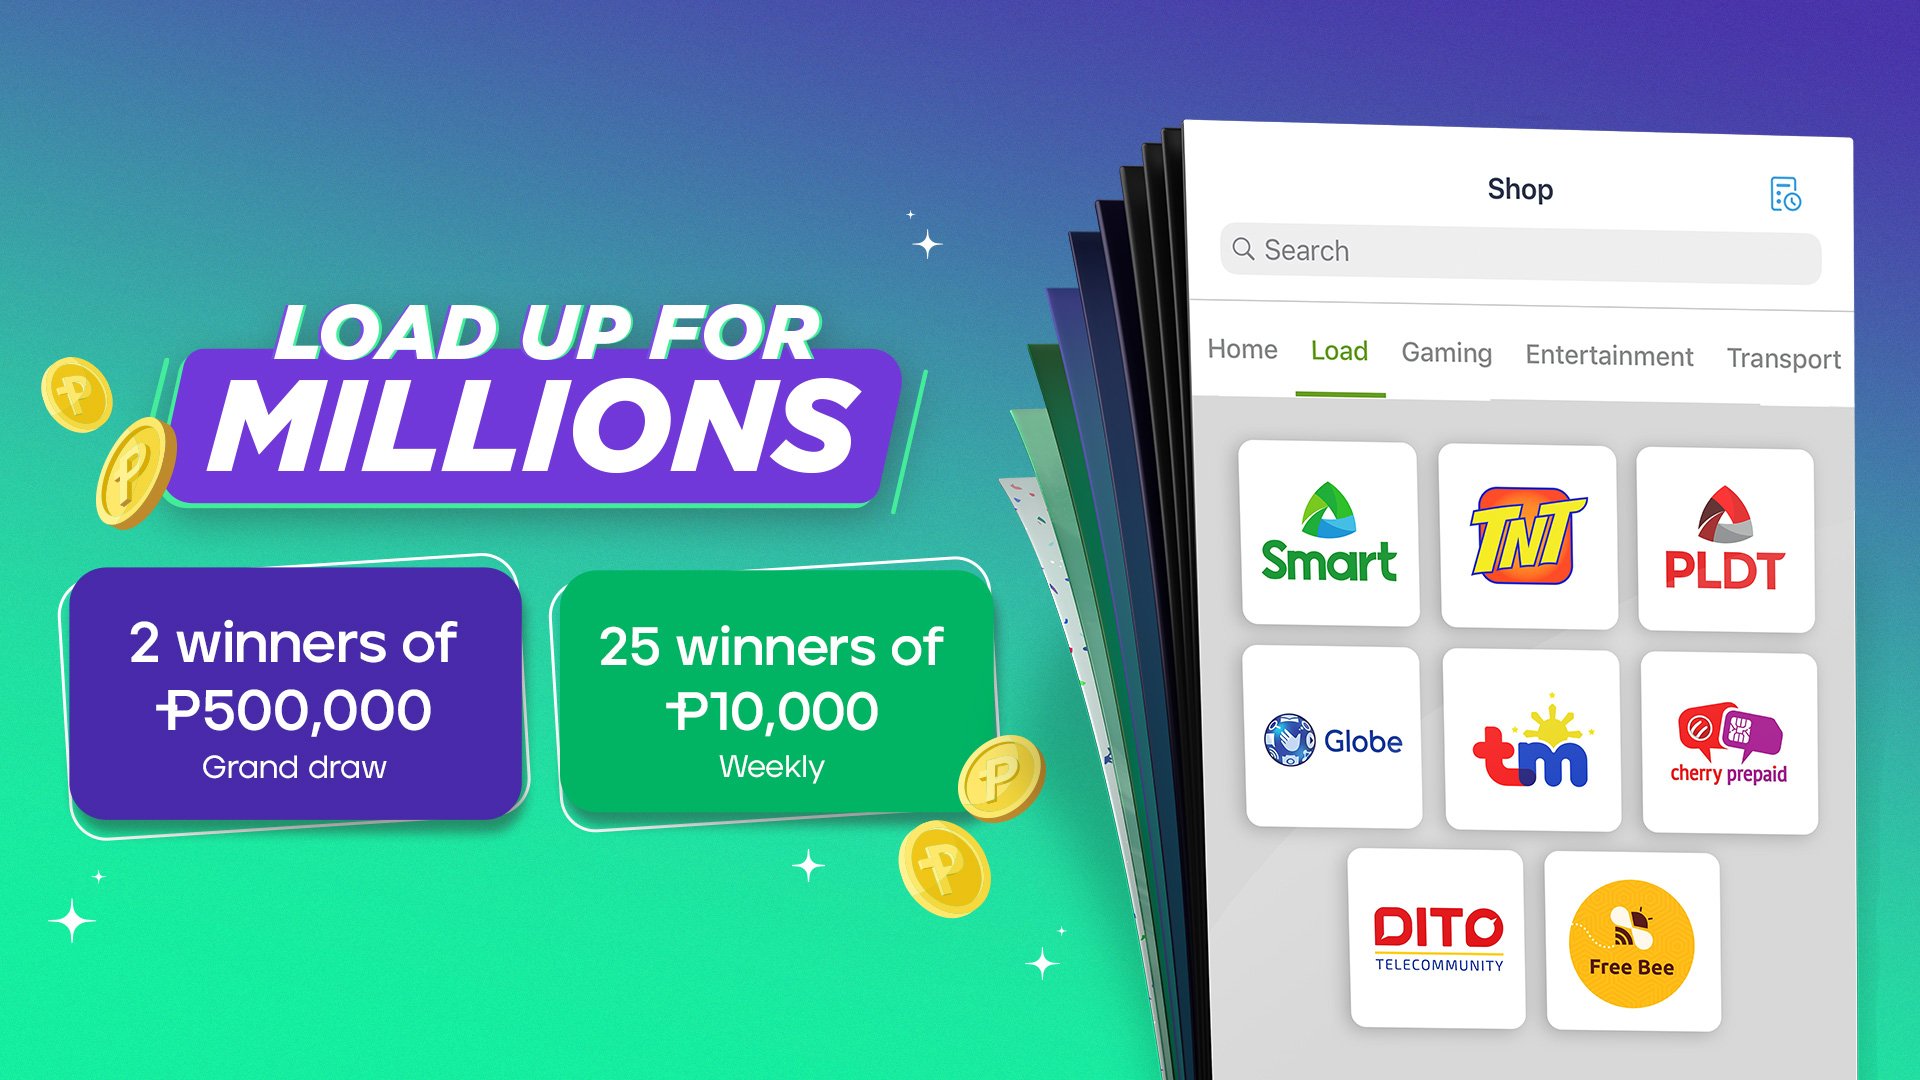 Buy Load to Win over P1 MILLION worth of prizes with Maya